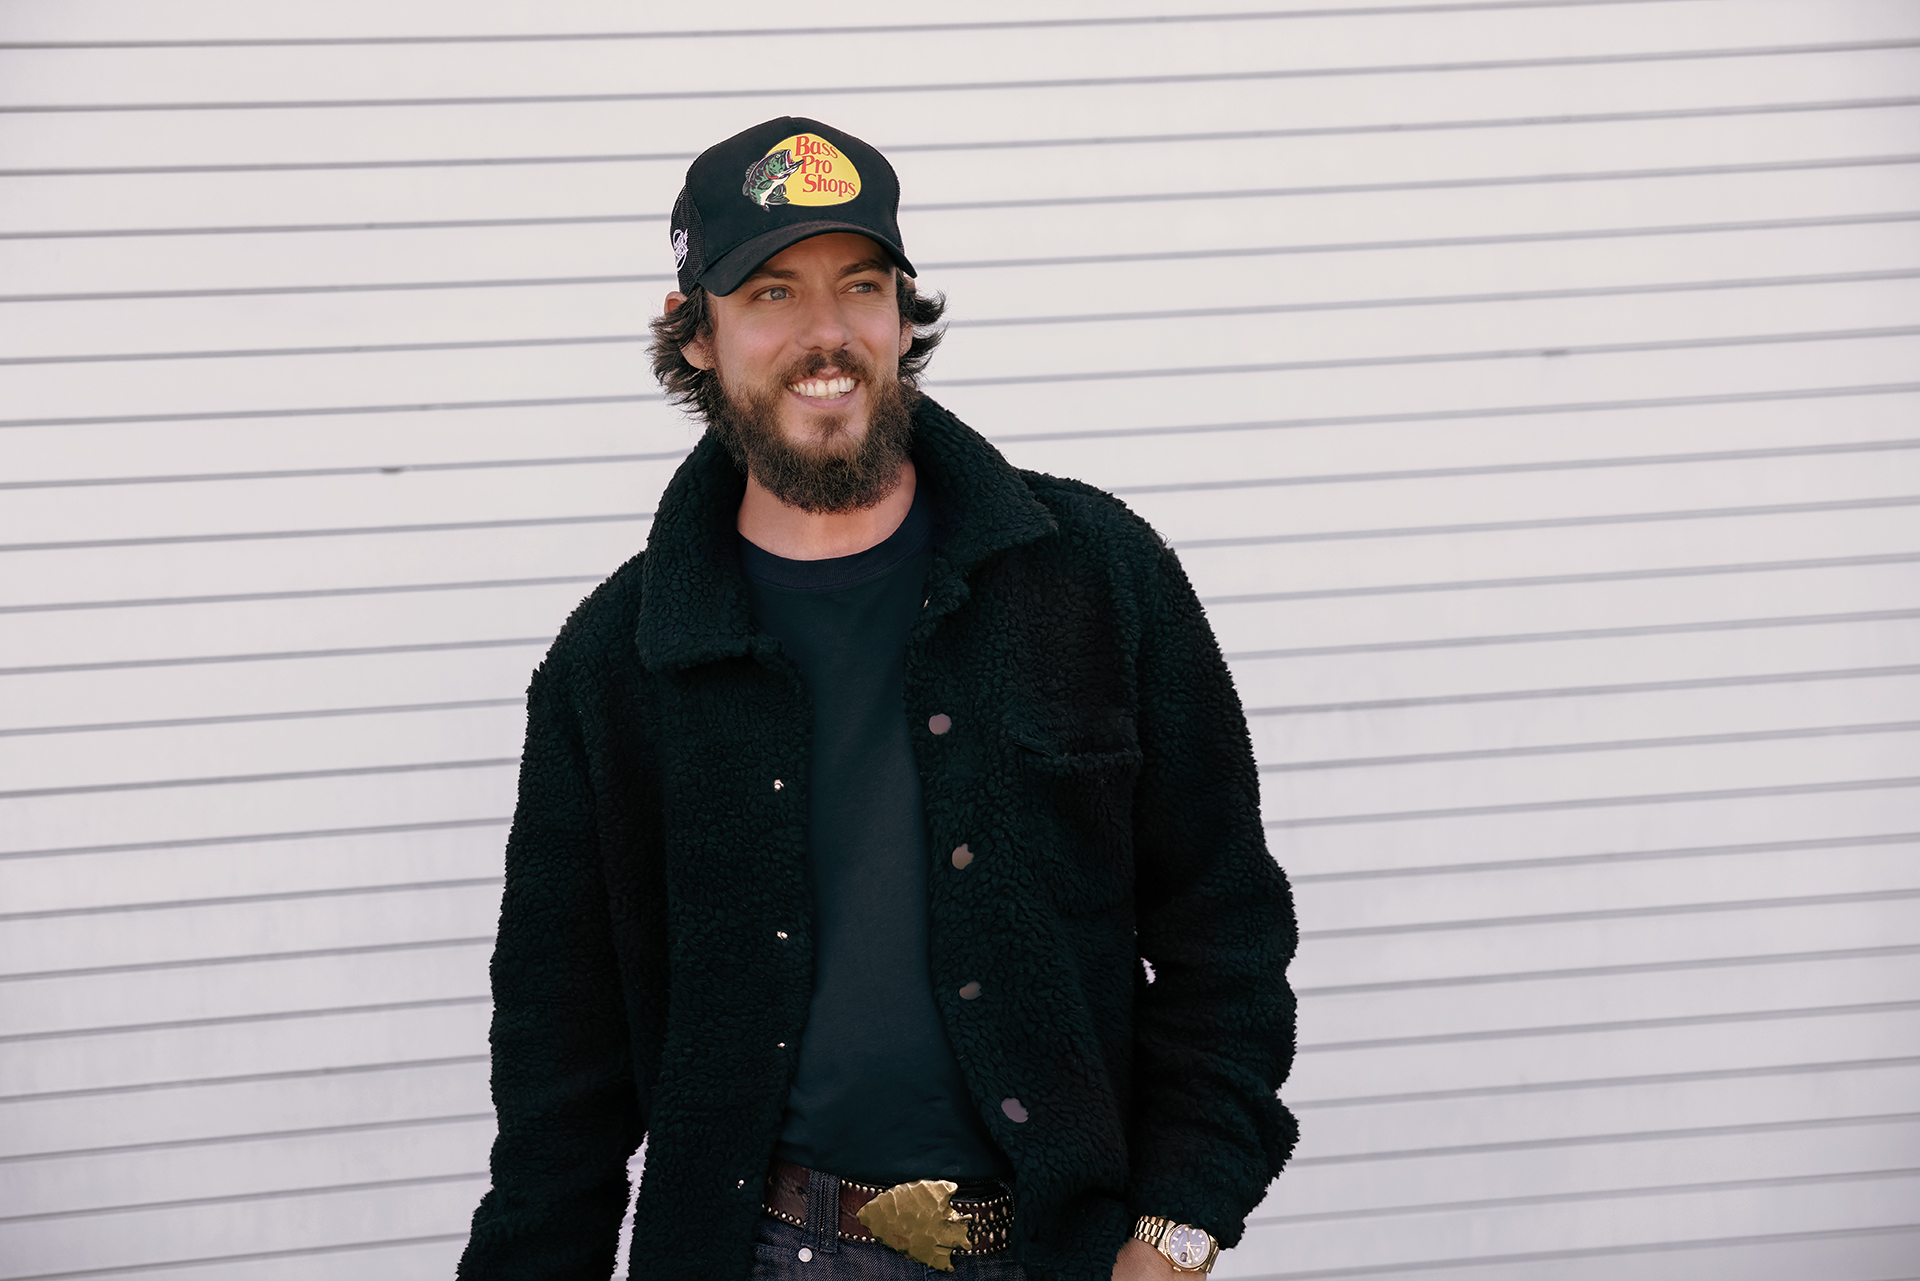 THIRTY-FIVE OUT-OF-THE-GATE ADDS FOR CHRIS JANSON’S SUMMER ANTHEM “KEYS TO THE COUNTRY”